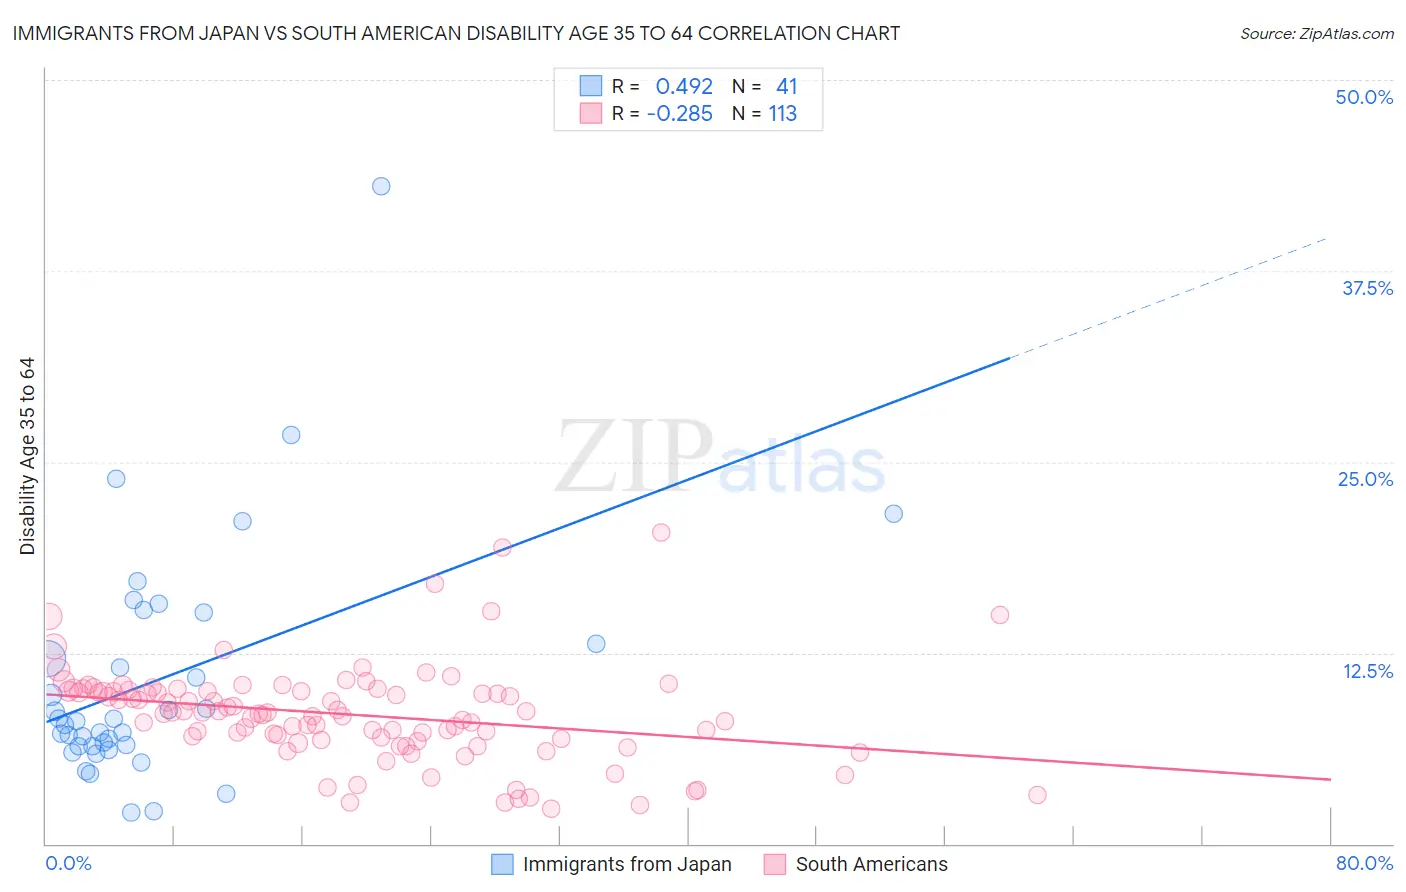 Immigrants from Japan vs South American Disability Age 35 to 64